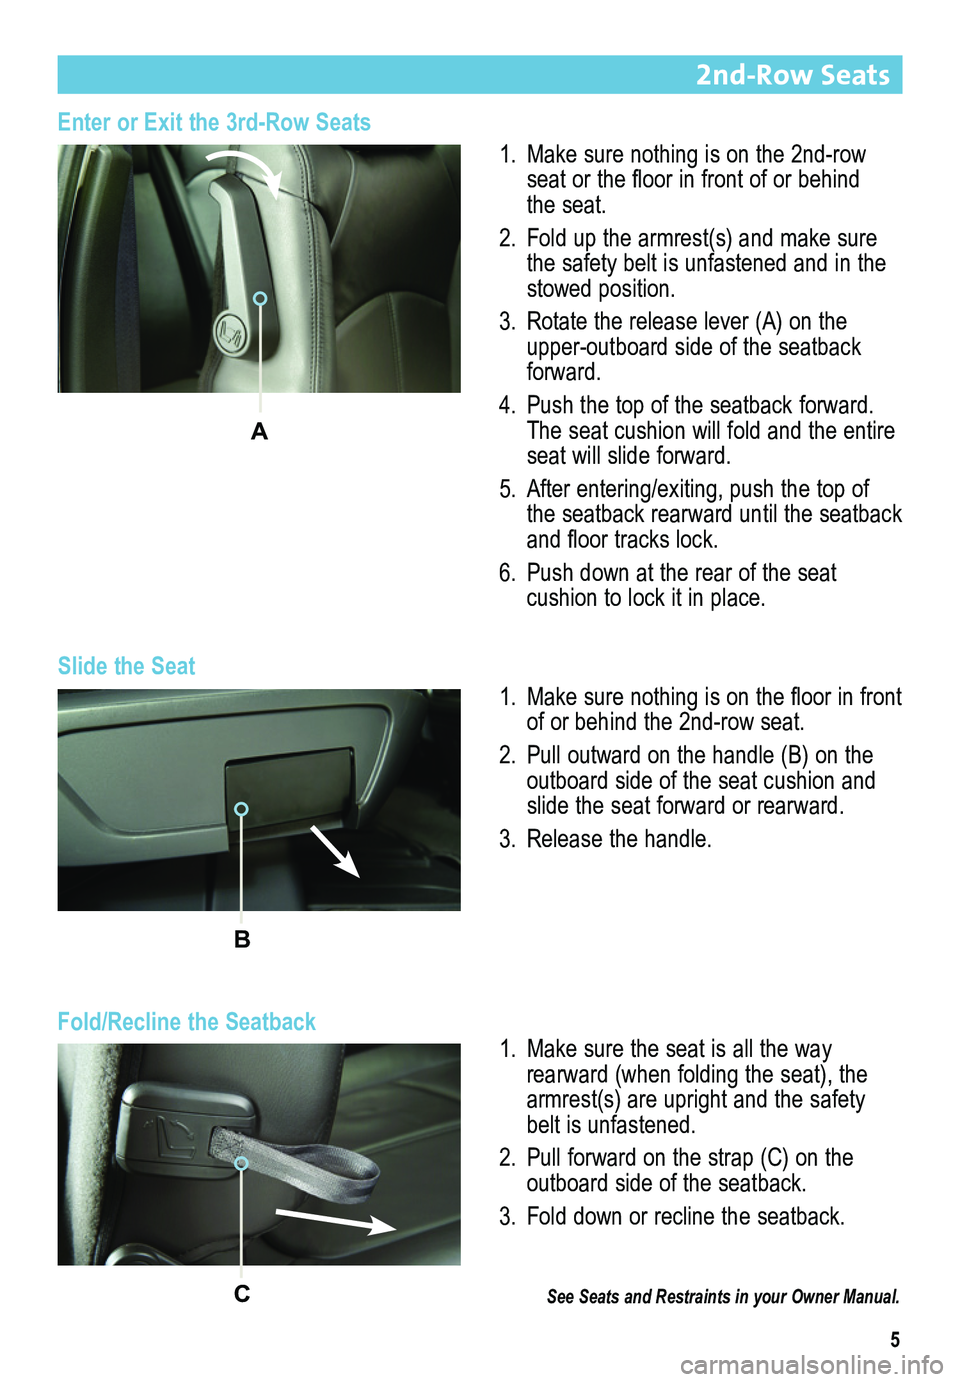 BUICK ENCLAVE 2014  Get To Know Guide 5
2nd-Row Seats 
Slide the Seat
1. Make sure nothing is on the 2nd-row seat or the floor in front of or behind the seat.
2. Fold up the armrest(s) and make sure the safety belt is unfastened and in th